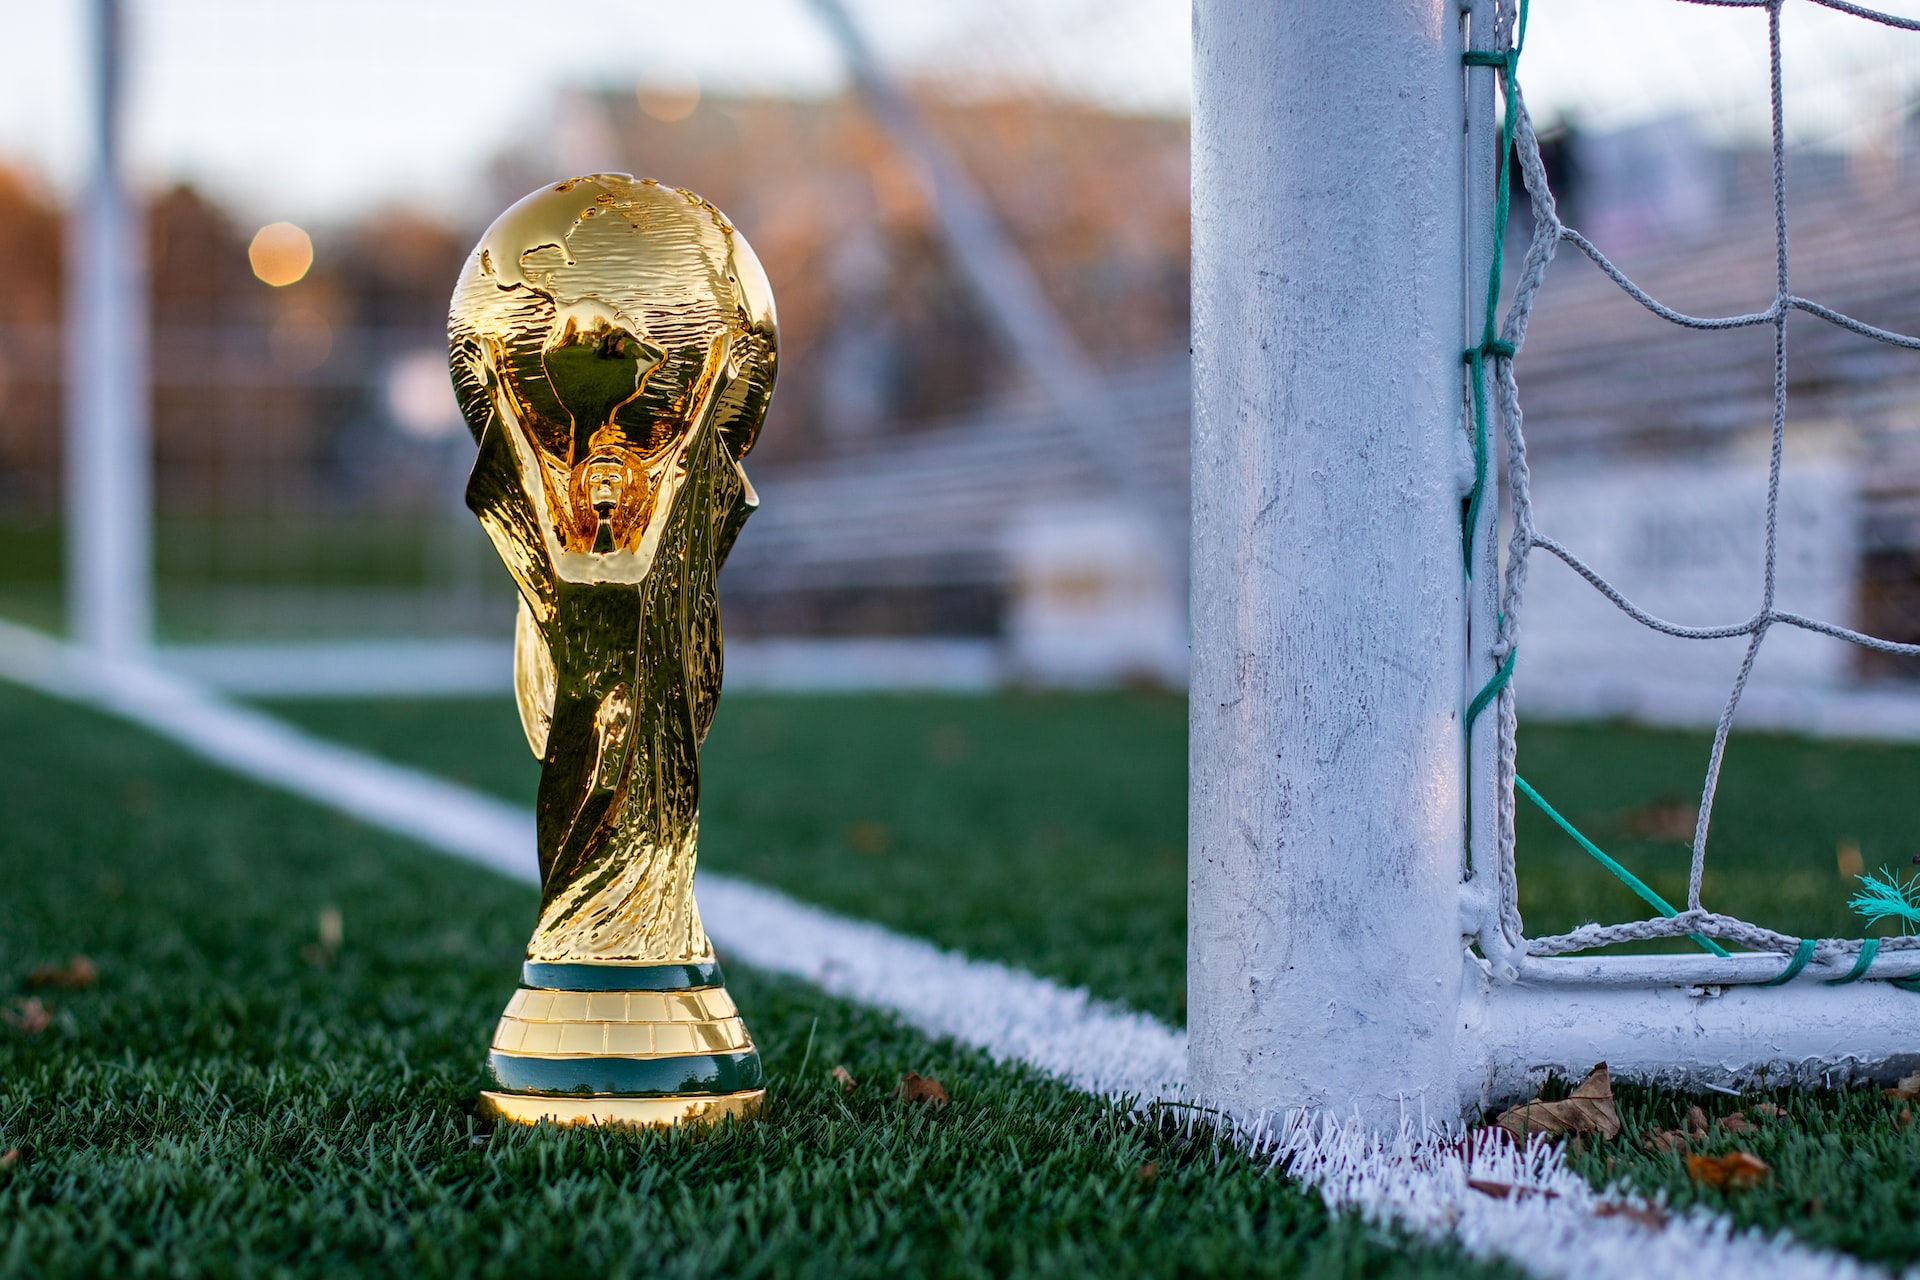 World Cup trophy on a soccer field